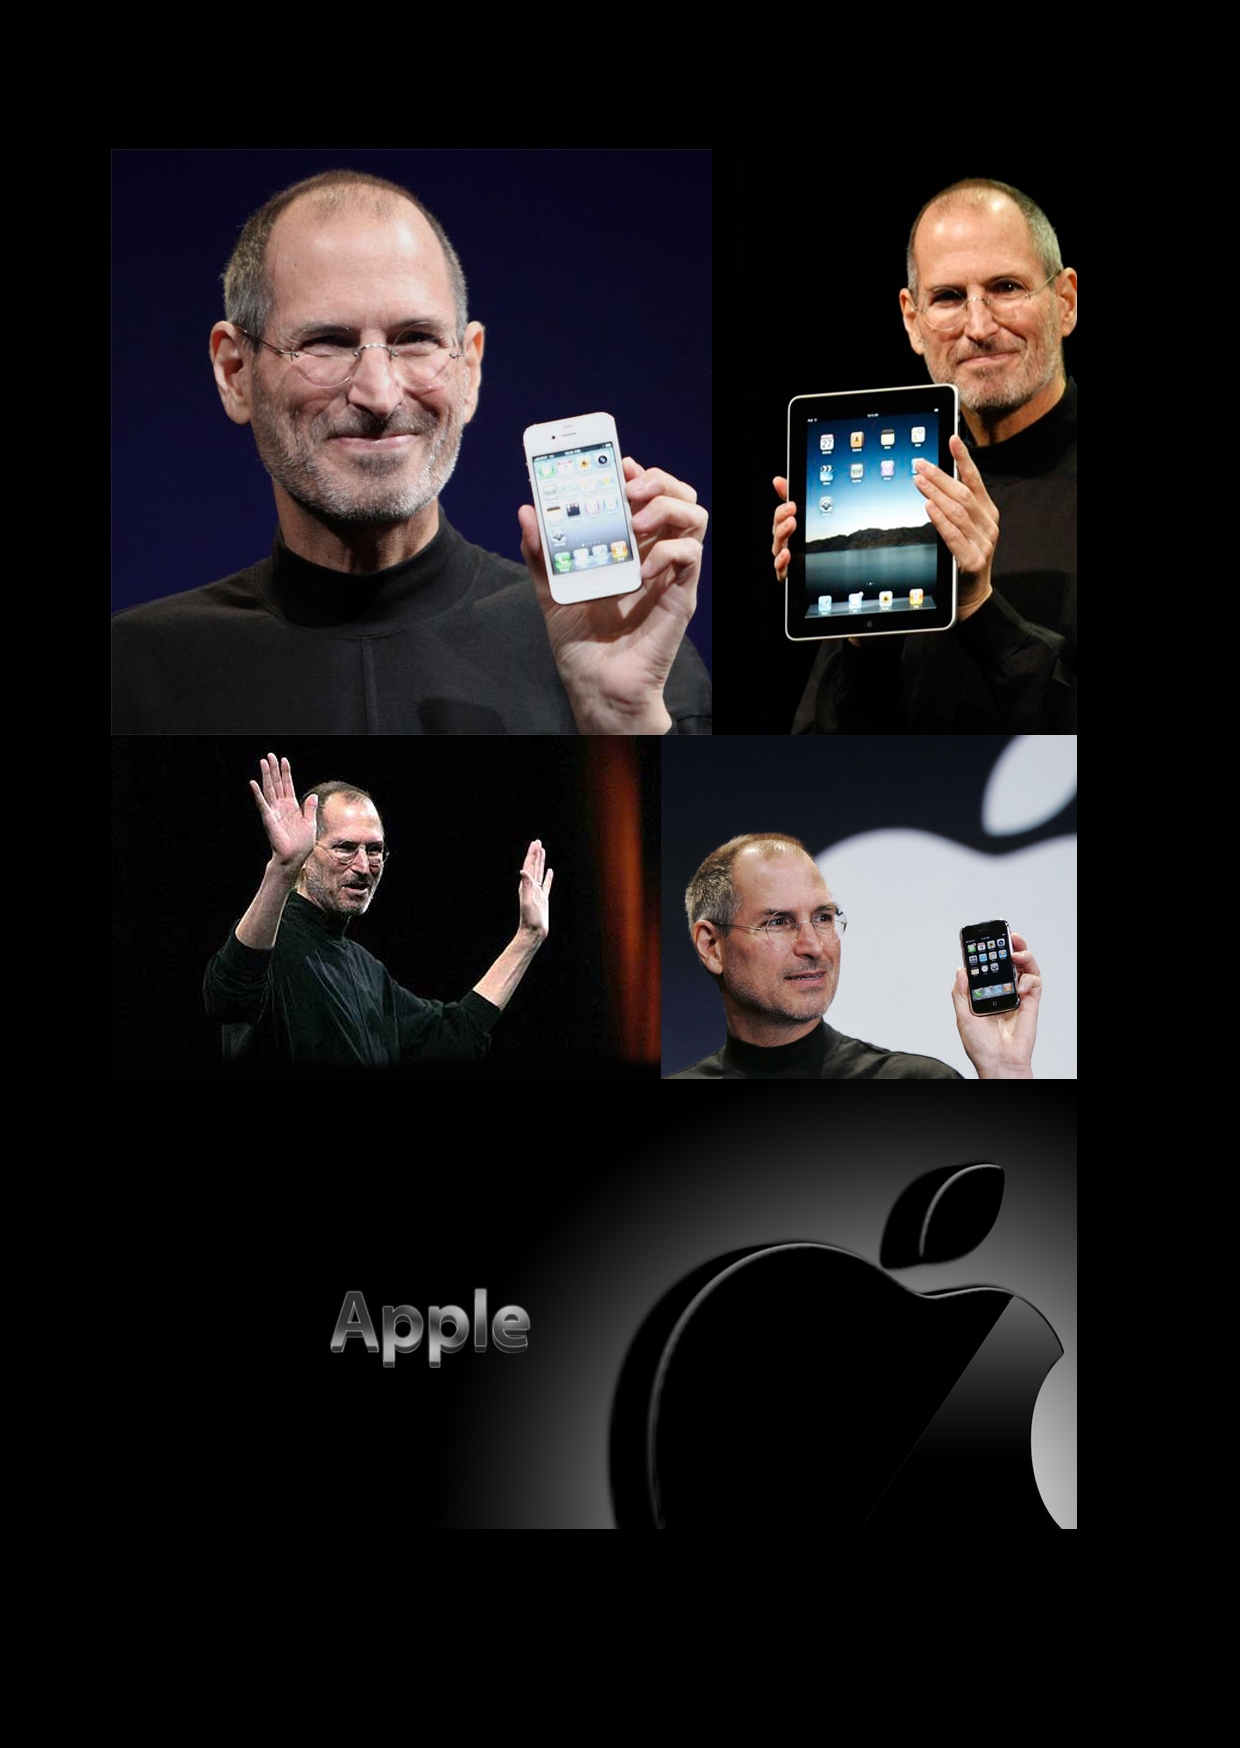 Steve Jobs, the founder of Apple computers and inventor of the iPod and iPhone